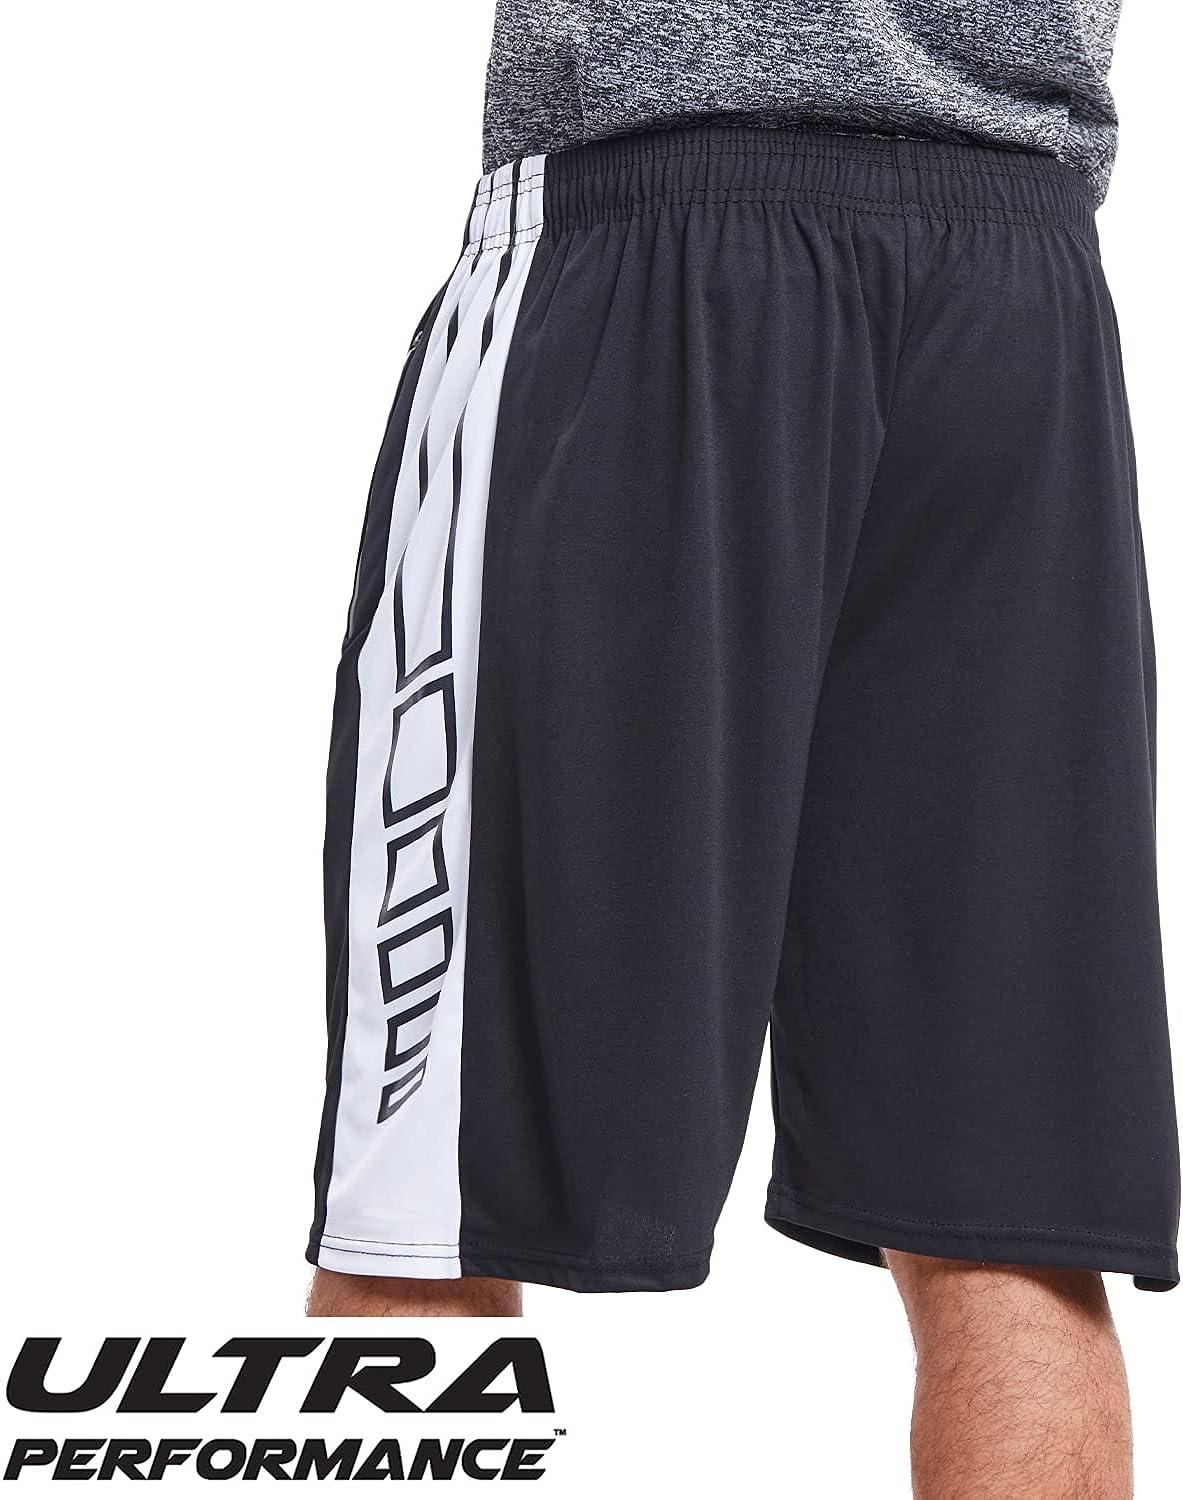 Ultra Performance Mens Athletic Running Shorts, Basketball Gym Workout  Shorts with Zippered Pockets | Printed Marble Dry Fit Shorts X-Large 5 Pack